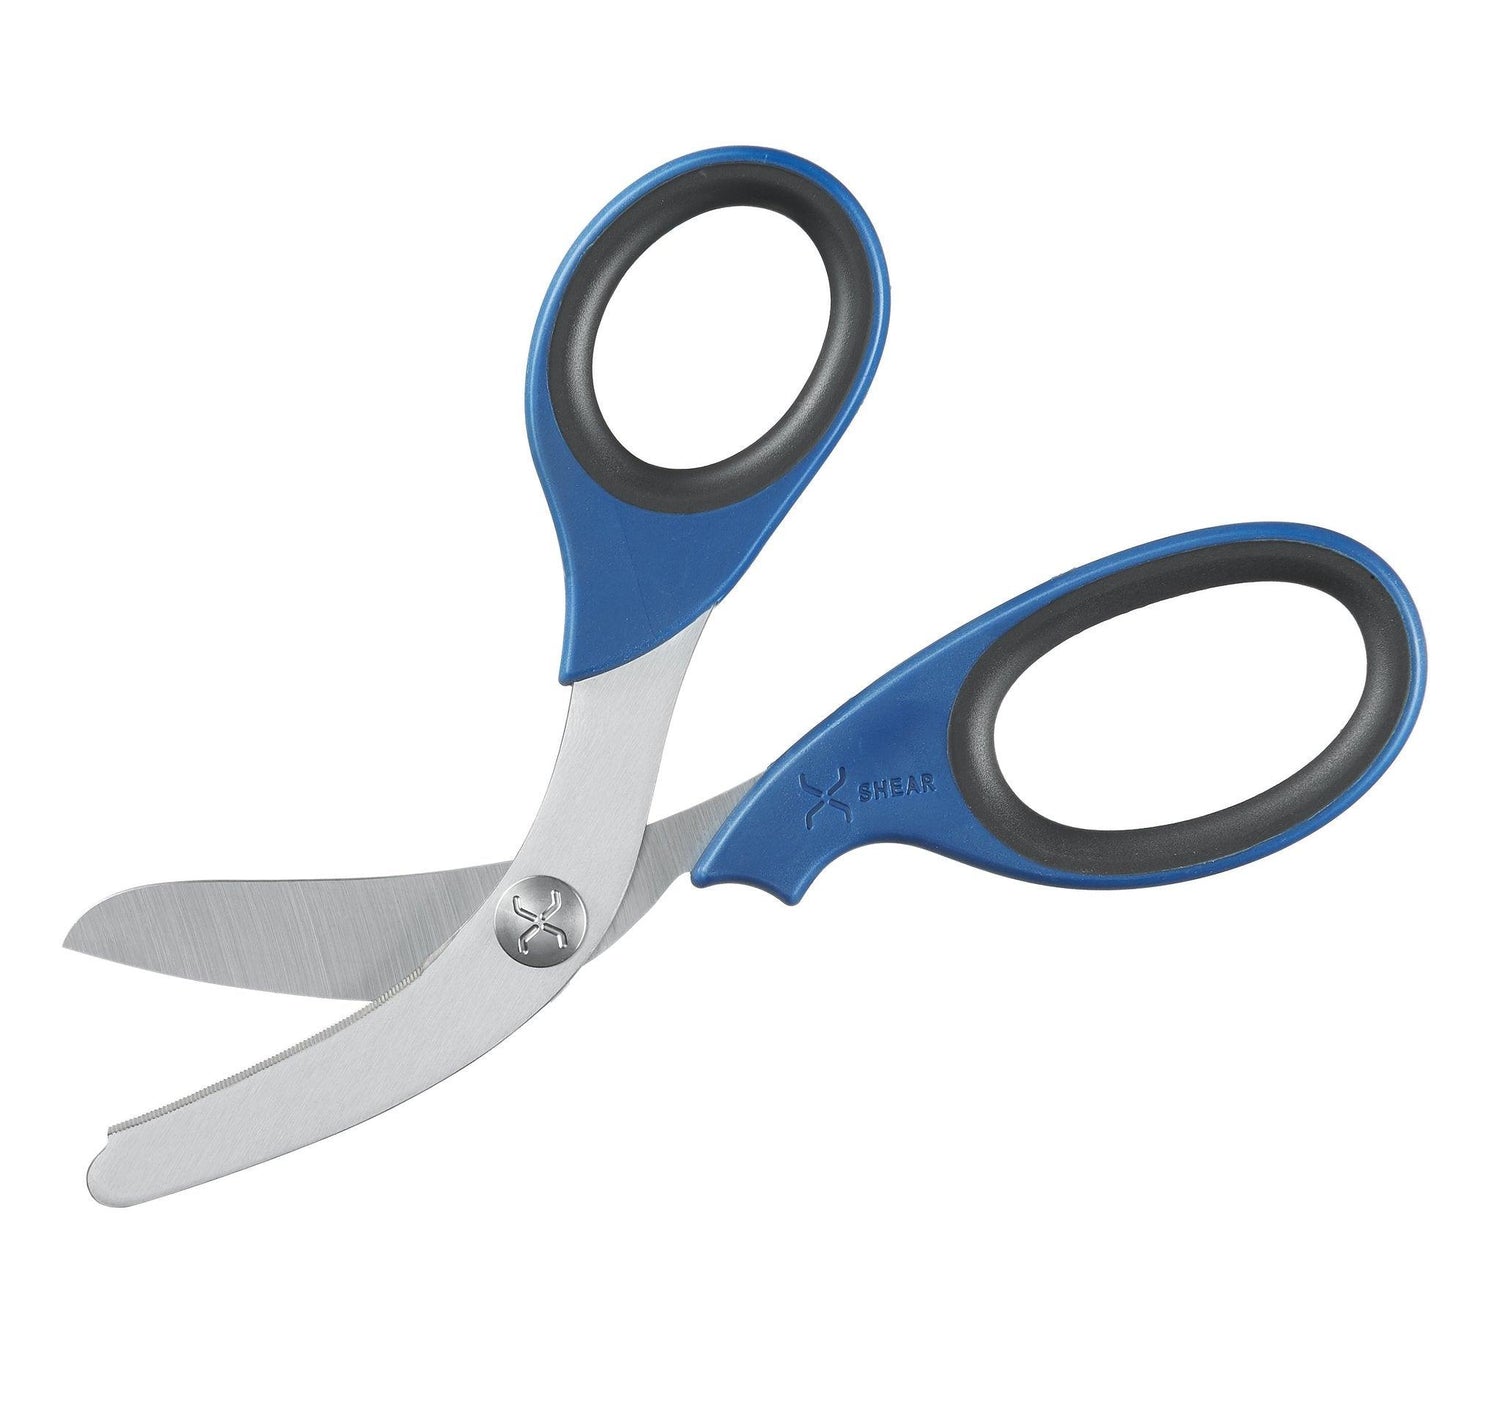 XSHEAR Heavy Duty Trauma Shears with Stainless Steel Uncoated Blades, 7.5" - First Aid Plus 